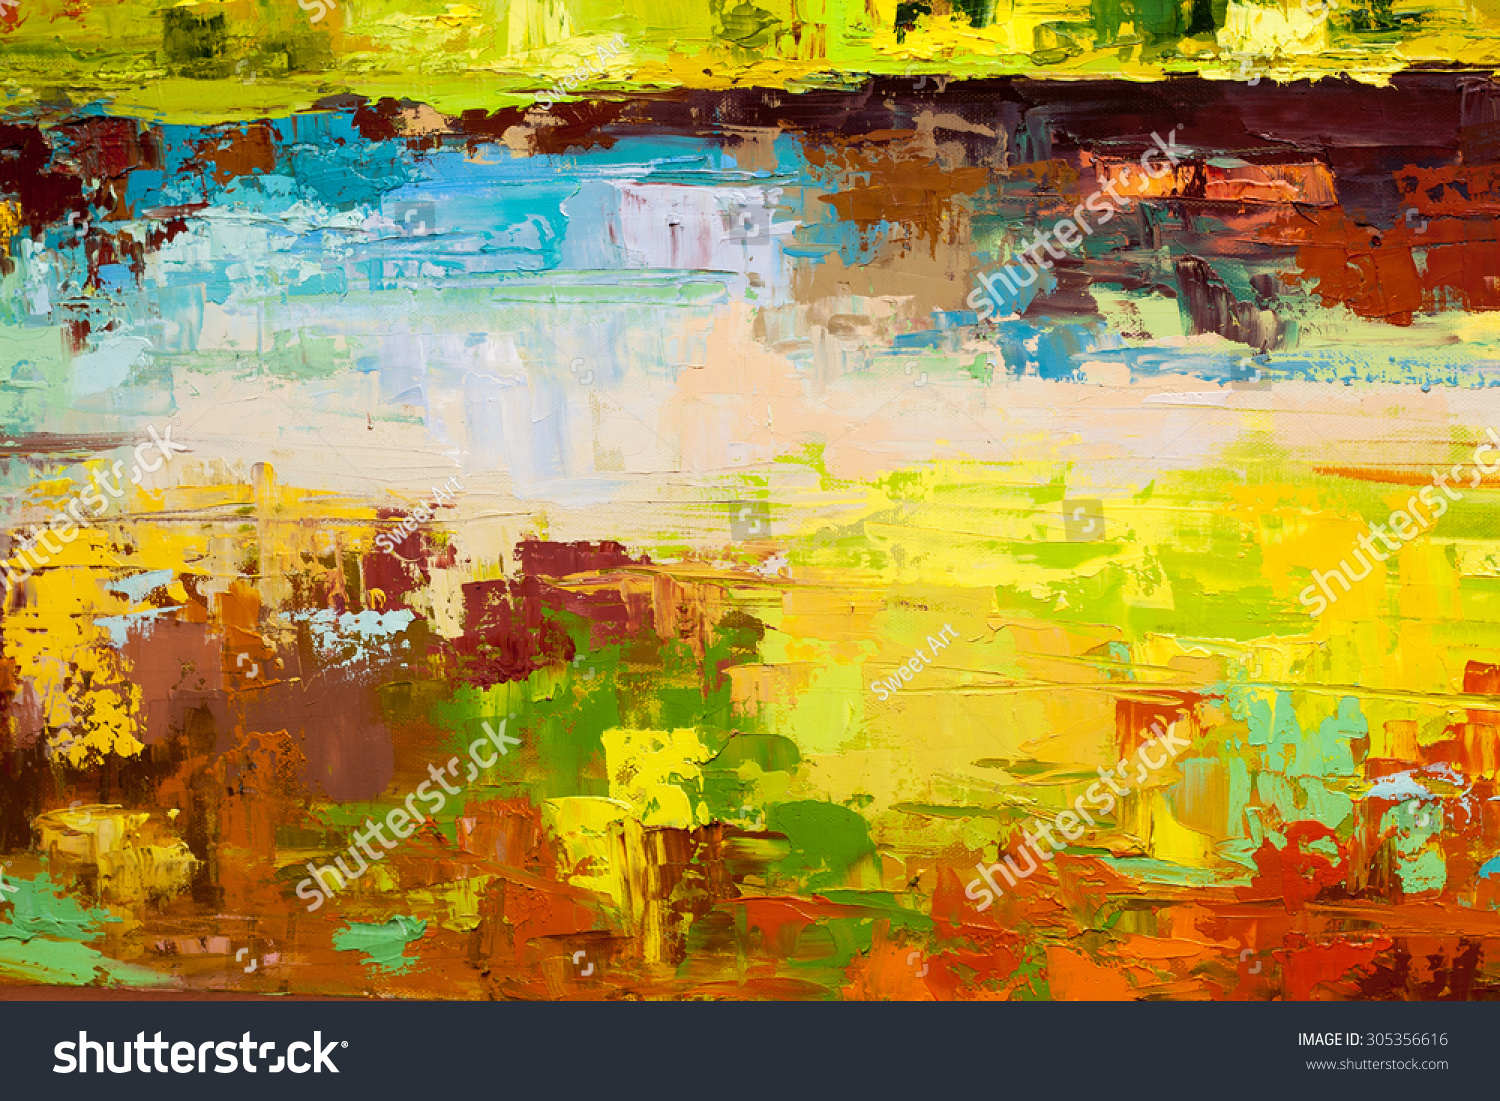 Abstract Art Background. Oil Painting On Canvas. Brown, Green, Blue And ...